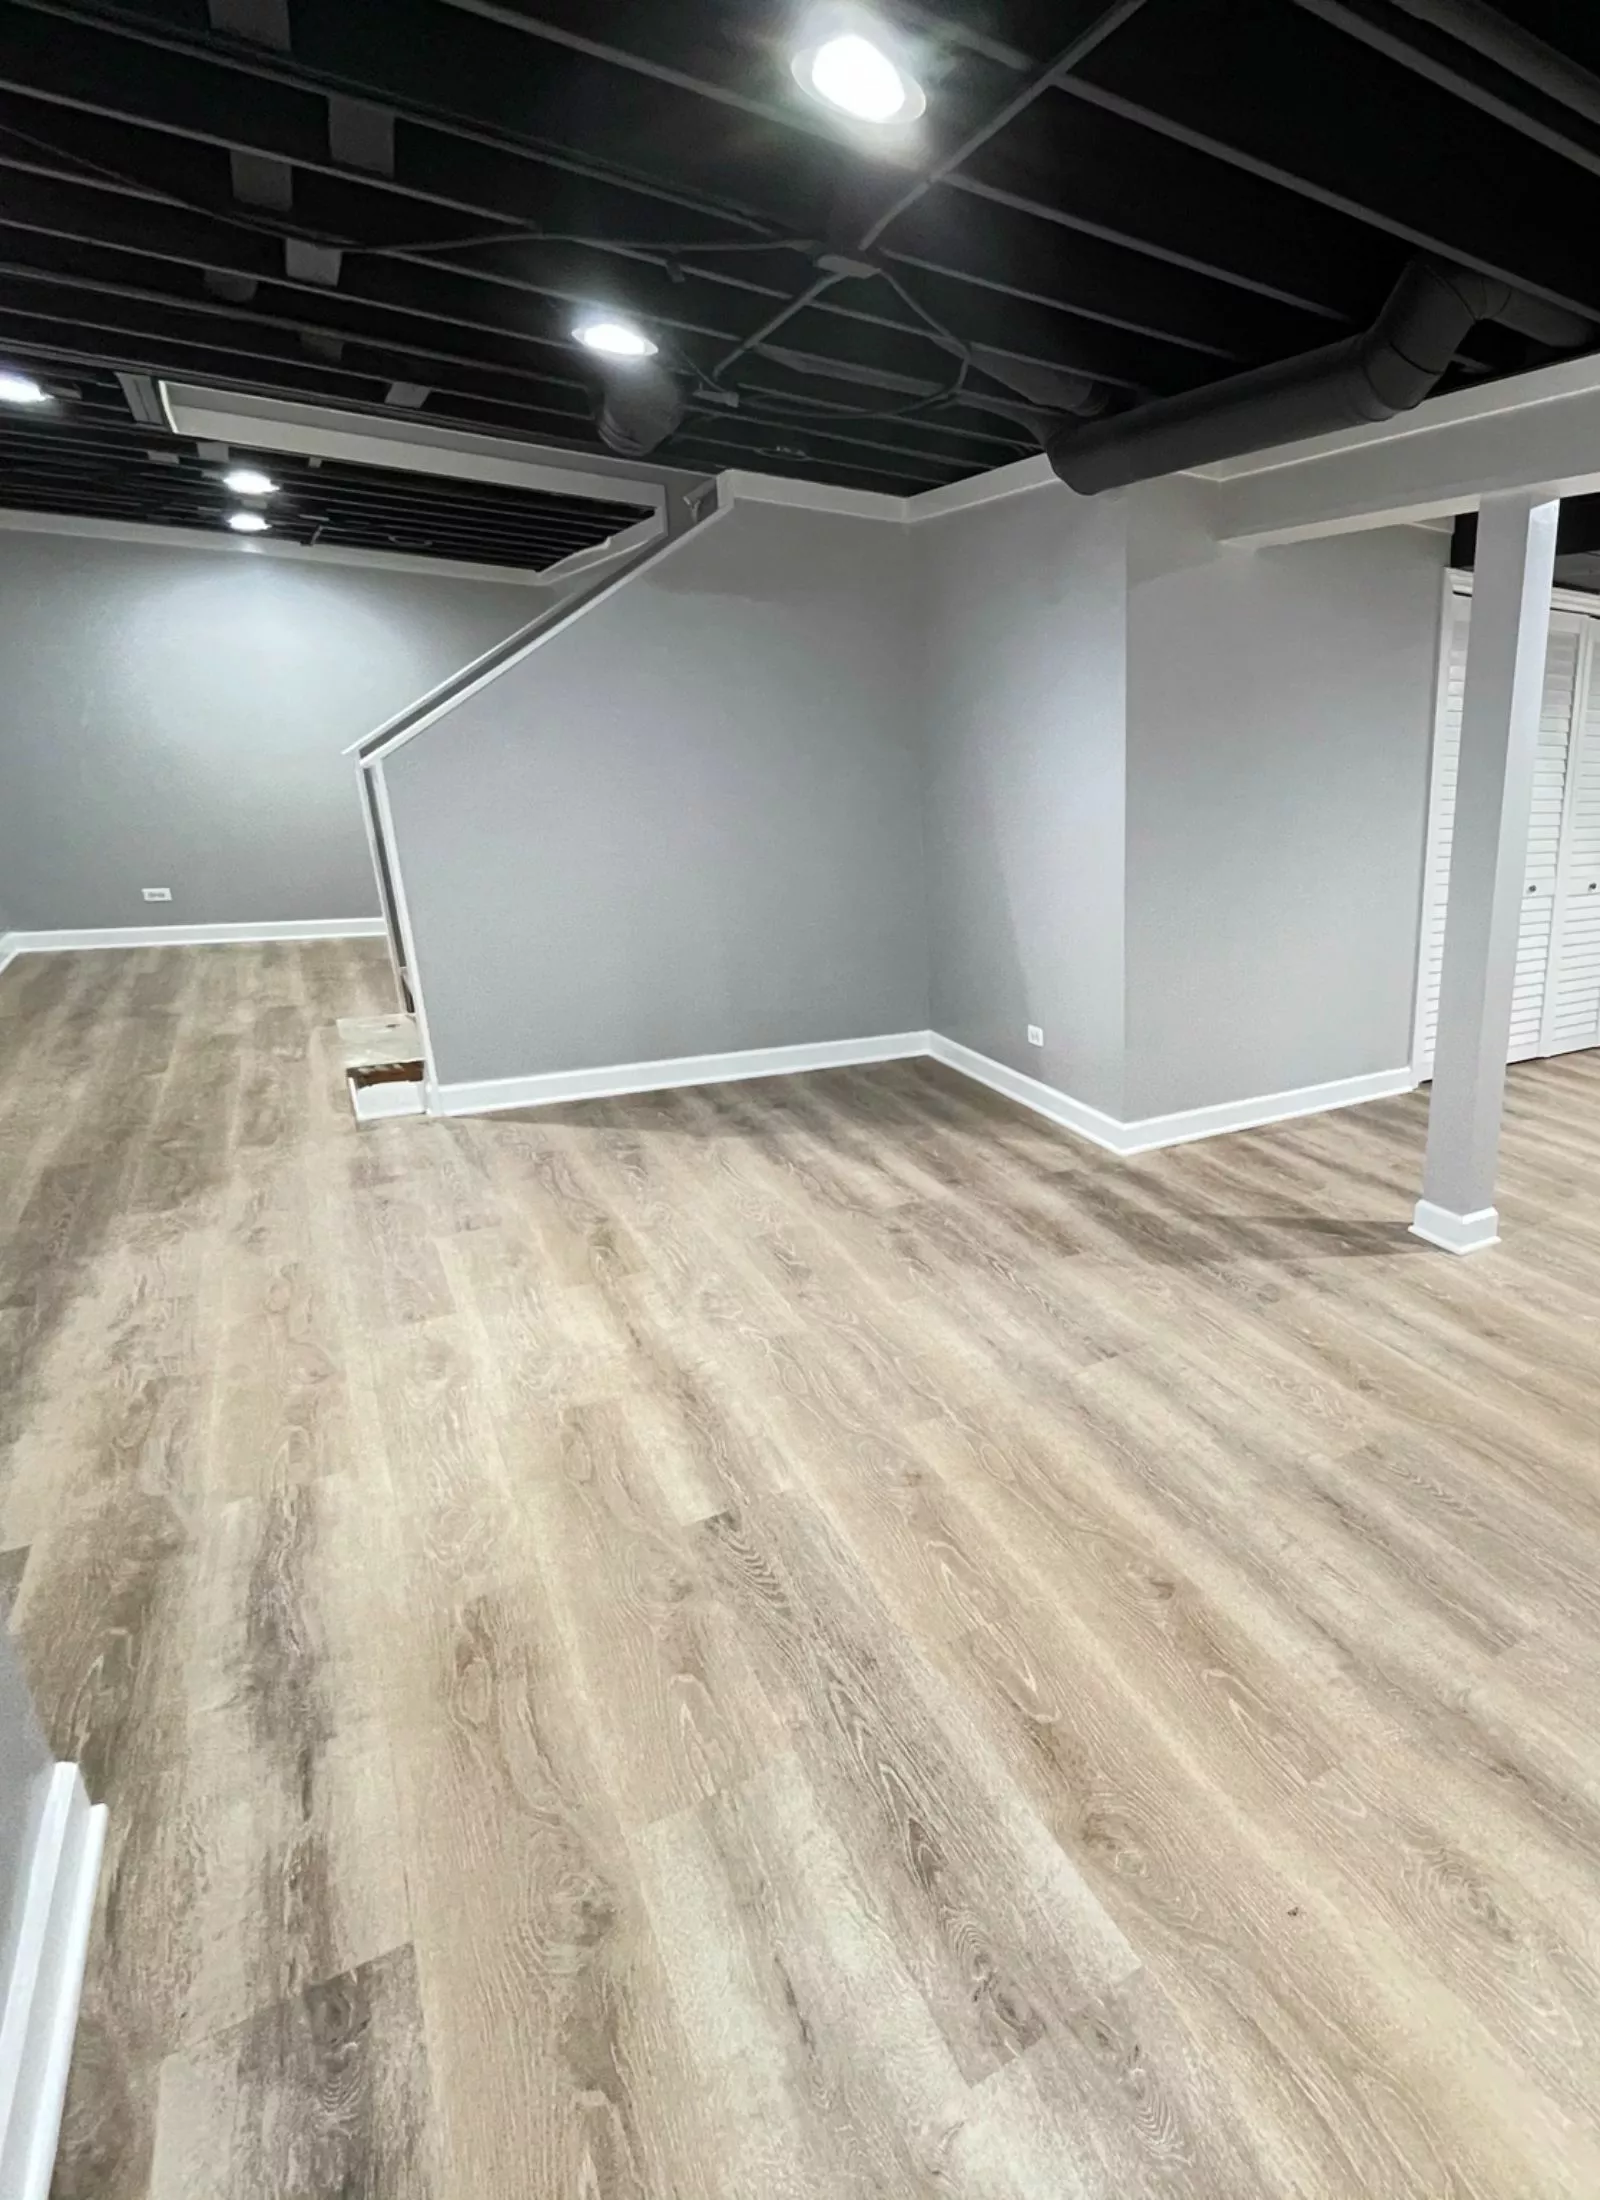 A basement with wood floors and white walls undergoing a bathroom renovation.